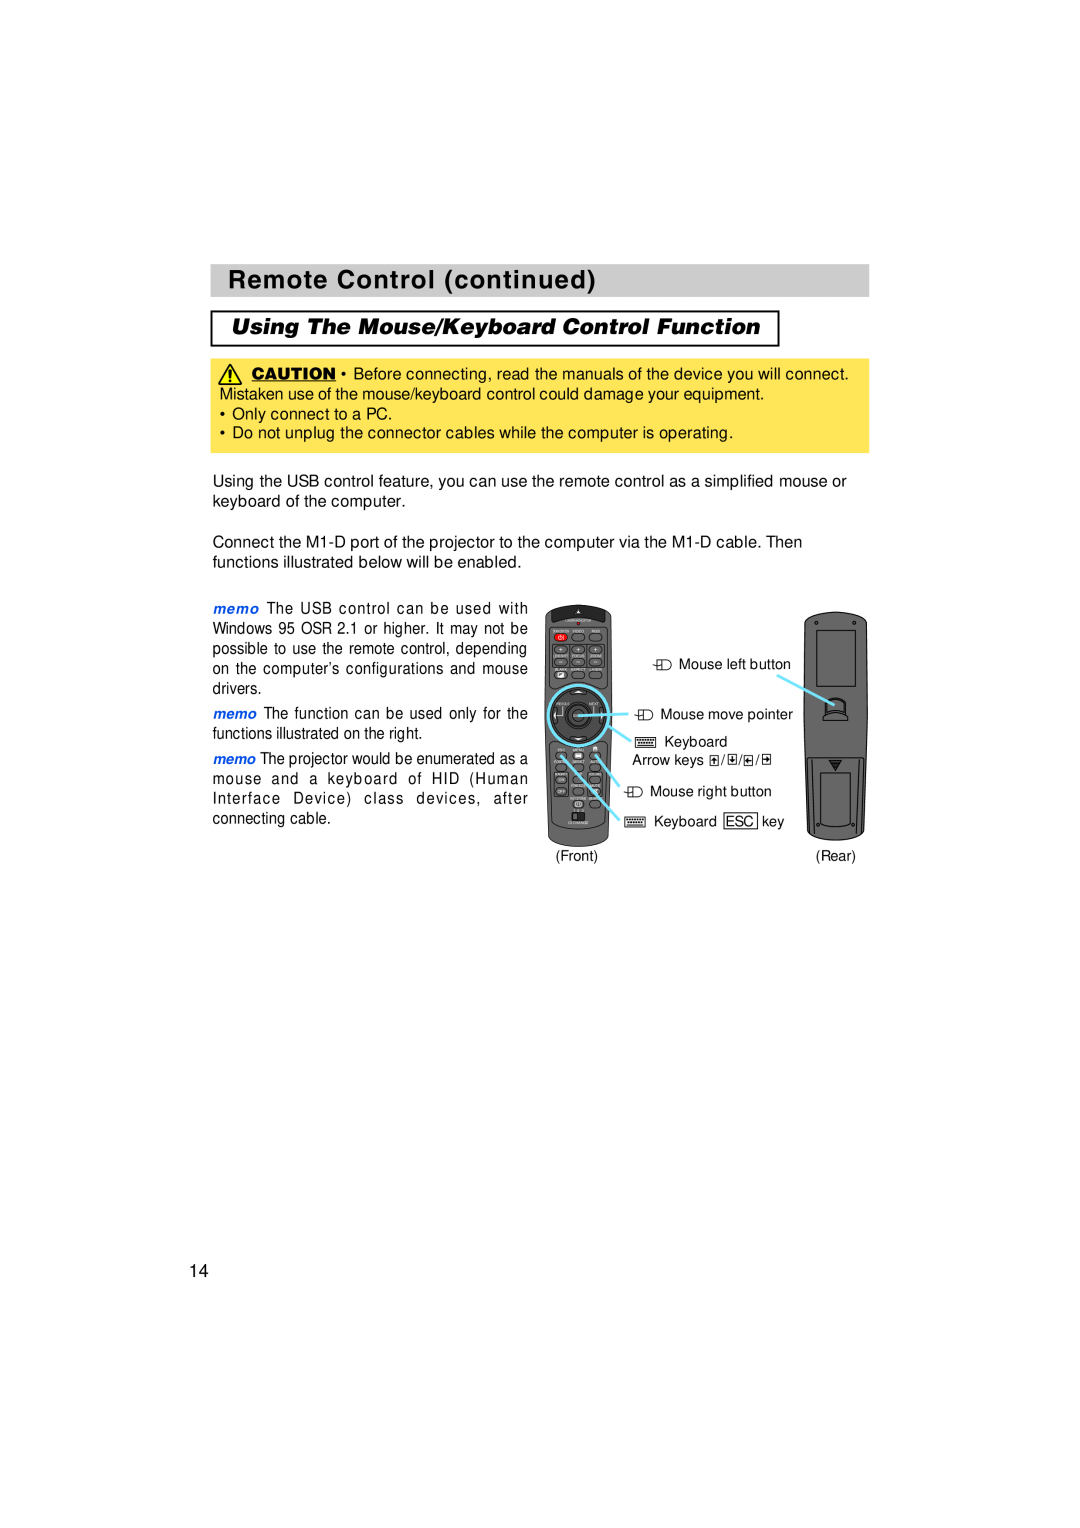 BOXLIGHT MP-58i, MP-57i user manual Using The Mouse/Keyboard Control Function, Remote Control continued 